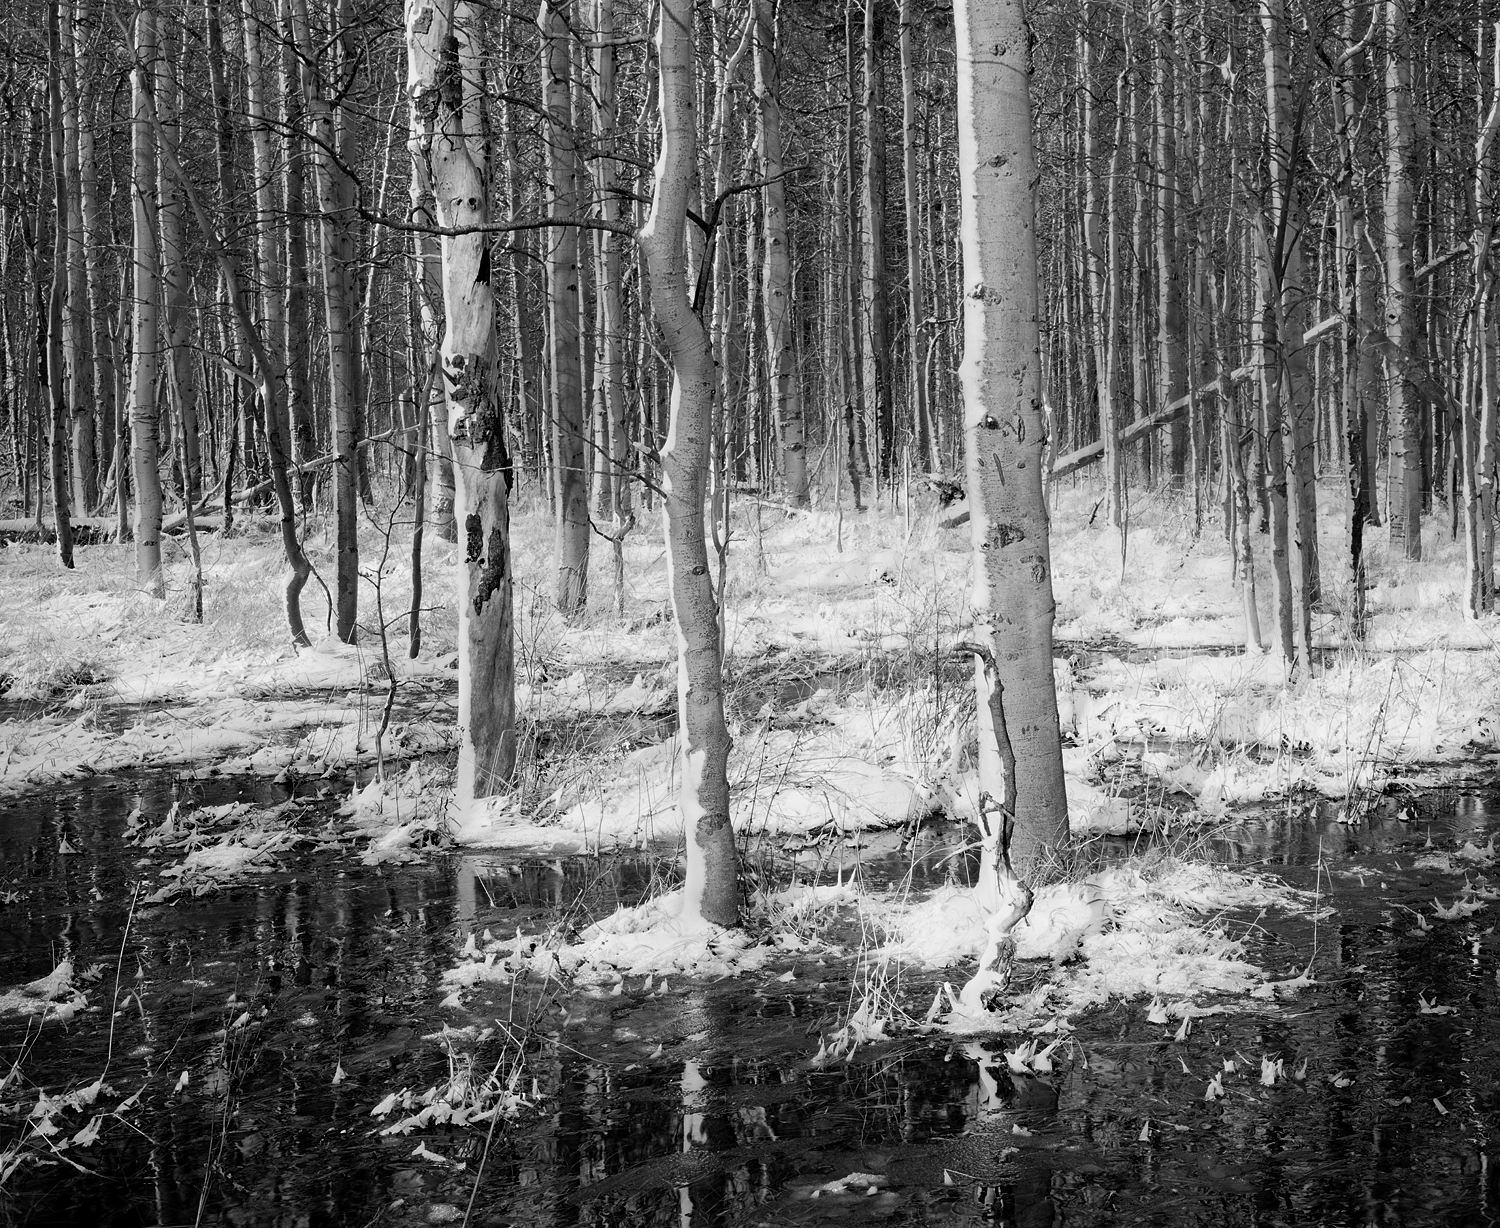 Aspens, Snow and Reflections Black and White